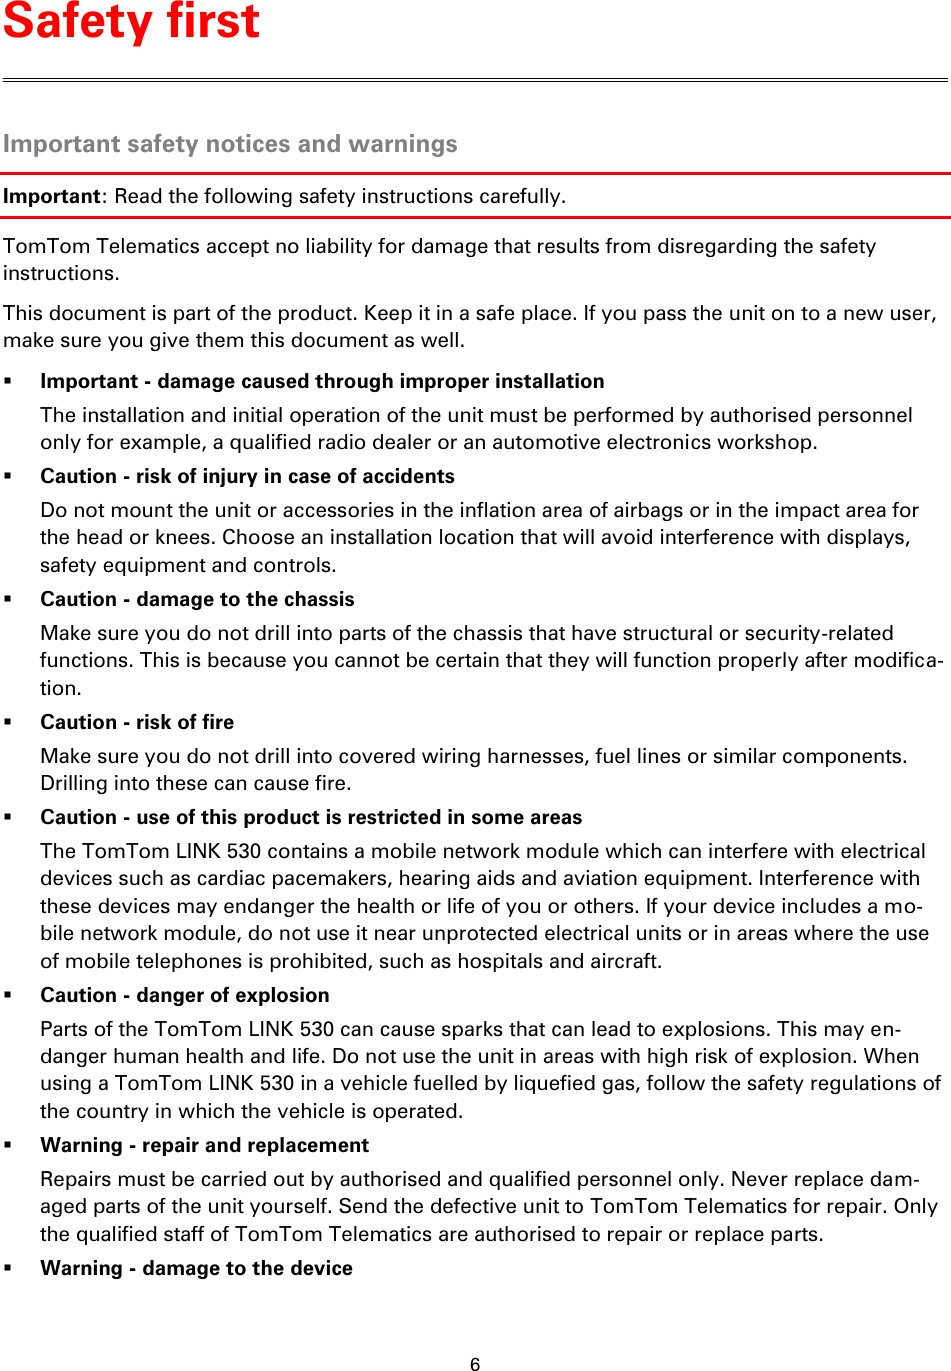 6    Important safety notices and warnings Important: Read the following safety instructions carefully. TomTom Telematics accept no liability for damage that results from disregarding the safety instructions. This document is part of the product. Keep it in a safe place. If you pass the unit on to a new user, make sure you give them this document as well.  Important - damage caused through improper installation The installation and initial operation of the unit must be performed by authorised personnel only for example, a qualified radio dealer or an automotive electronics workshop.  Caution - risk of injury in case of accidents Do not mount the unit or accessories in the inflation area of airbags or in the impact area for the head or knees. Choose an installation location that will avoid interference with displays, safety equipment and controls.  Caution - damage to the chassis Make sure you do not drill into parts of the chassis that have structural or security-related functions. This is because you cannot be certain that they will function properly after modifica-tion.  Caution - risk of fire Make sure you do not drill into covered wiring harnesses, fuel lines or similar components. Drilling into these can cause fire.  Caution - use of this product is restricted in some areas The TomTom LINK 530 contains a mobile network module which can interfere with electrical devices such as cardiac pacemakers, hearing aids and aviation equipment. Interference with these devices may endanger the health or life of you or others. If your device includes a mo-bile network module, do not use it near unprotected electrical units or in areas where the use of mobile telephones is prohibited, such as hospitals and aircraft.  Caution - danger of explosion Parts of the TomTom LINK 530 can cause sparks that can lead to explosions. This may en-danger human health and life. Do not use the unit in areas with high risk of explosion. When using a TomTom LINK 530 in a vehicle fuelled by liquefied gas, follow the safety regulations of the country in which the vehicle is operated.  Warning - repair and replacement Repairs must be carried out by authorised and qualified personnel only. Never replace dam-aged parts of the unit yourself. Send the defective unit to TomTom Telematics for repair. Only the qualified staff of TomTom Telematics are authorised to repair or replace parts.  Warning - damage to the device Safety first 